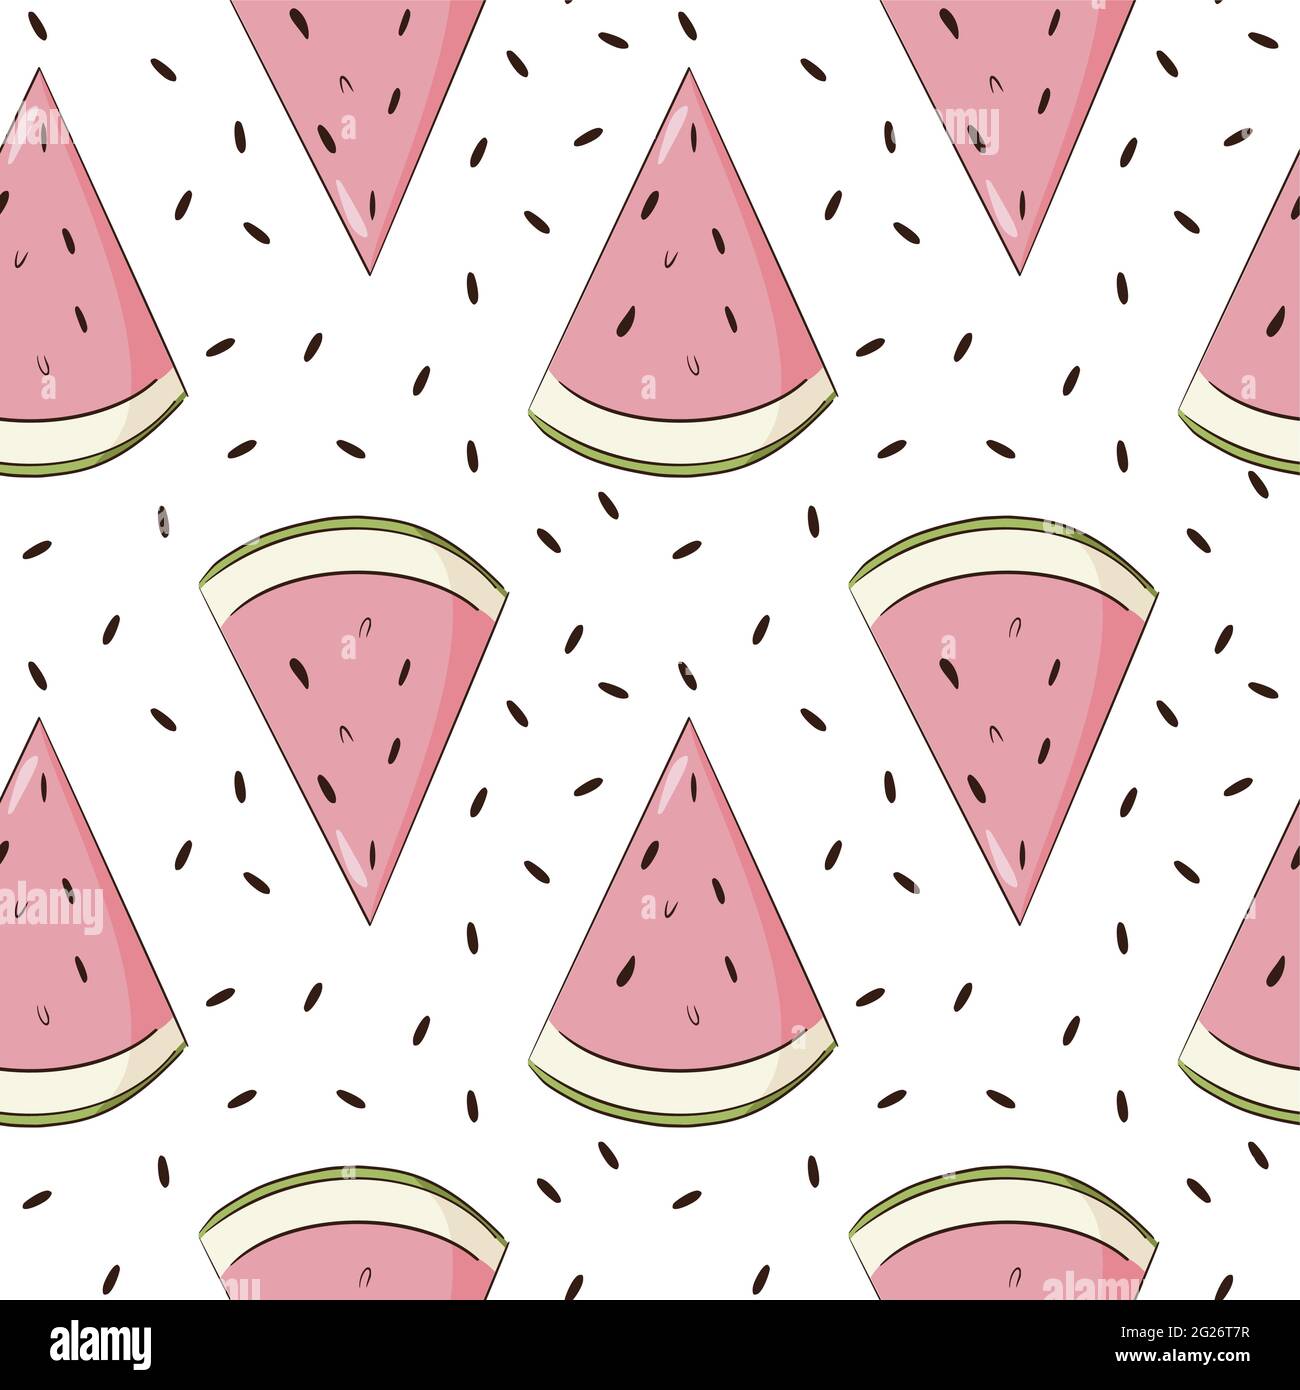 Watermelon Fruit Slices Wallpaper for Walls Fresh and Vibrant Décor